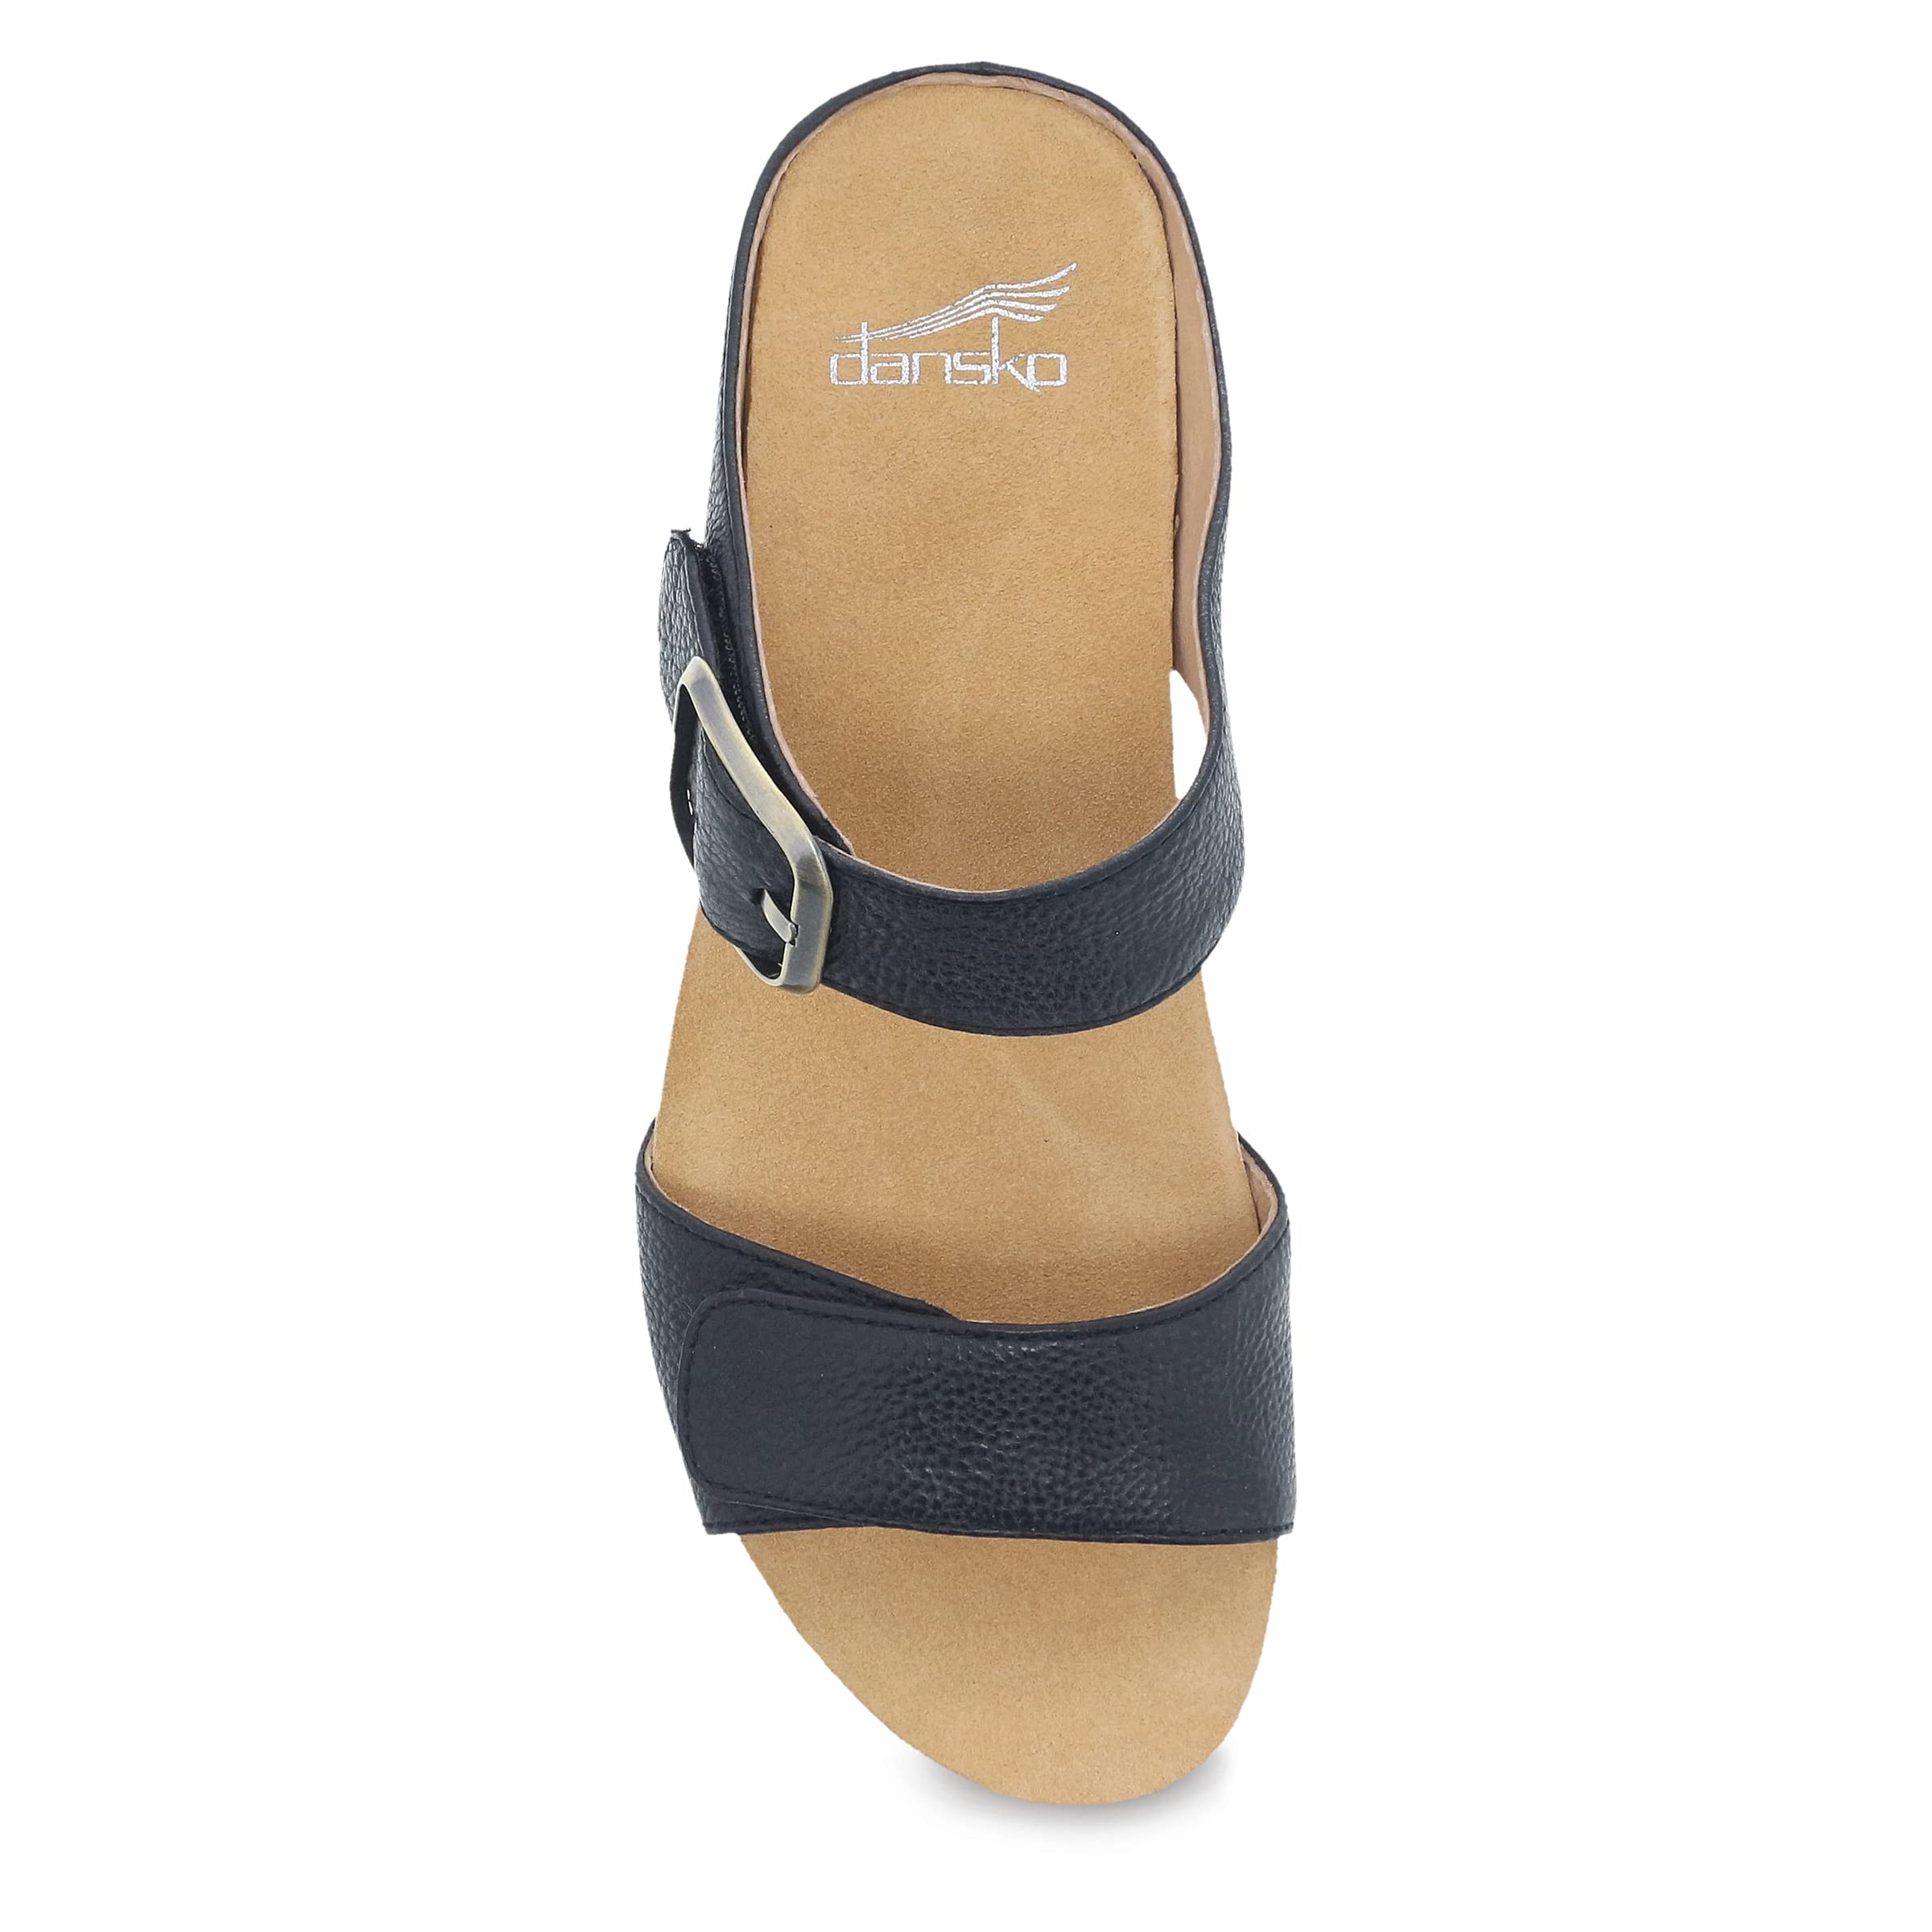 Dansko Tanya Slip-On Wedge Sandal for Women – Cushioned, Contoured Footbed for All-Day Comfort and Support – Hook & Loop Strap with Buckle Detail – Lightweight Rubber Outsole